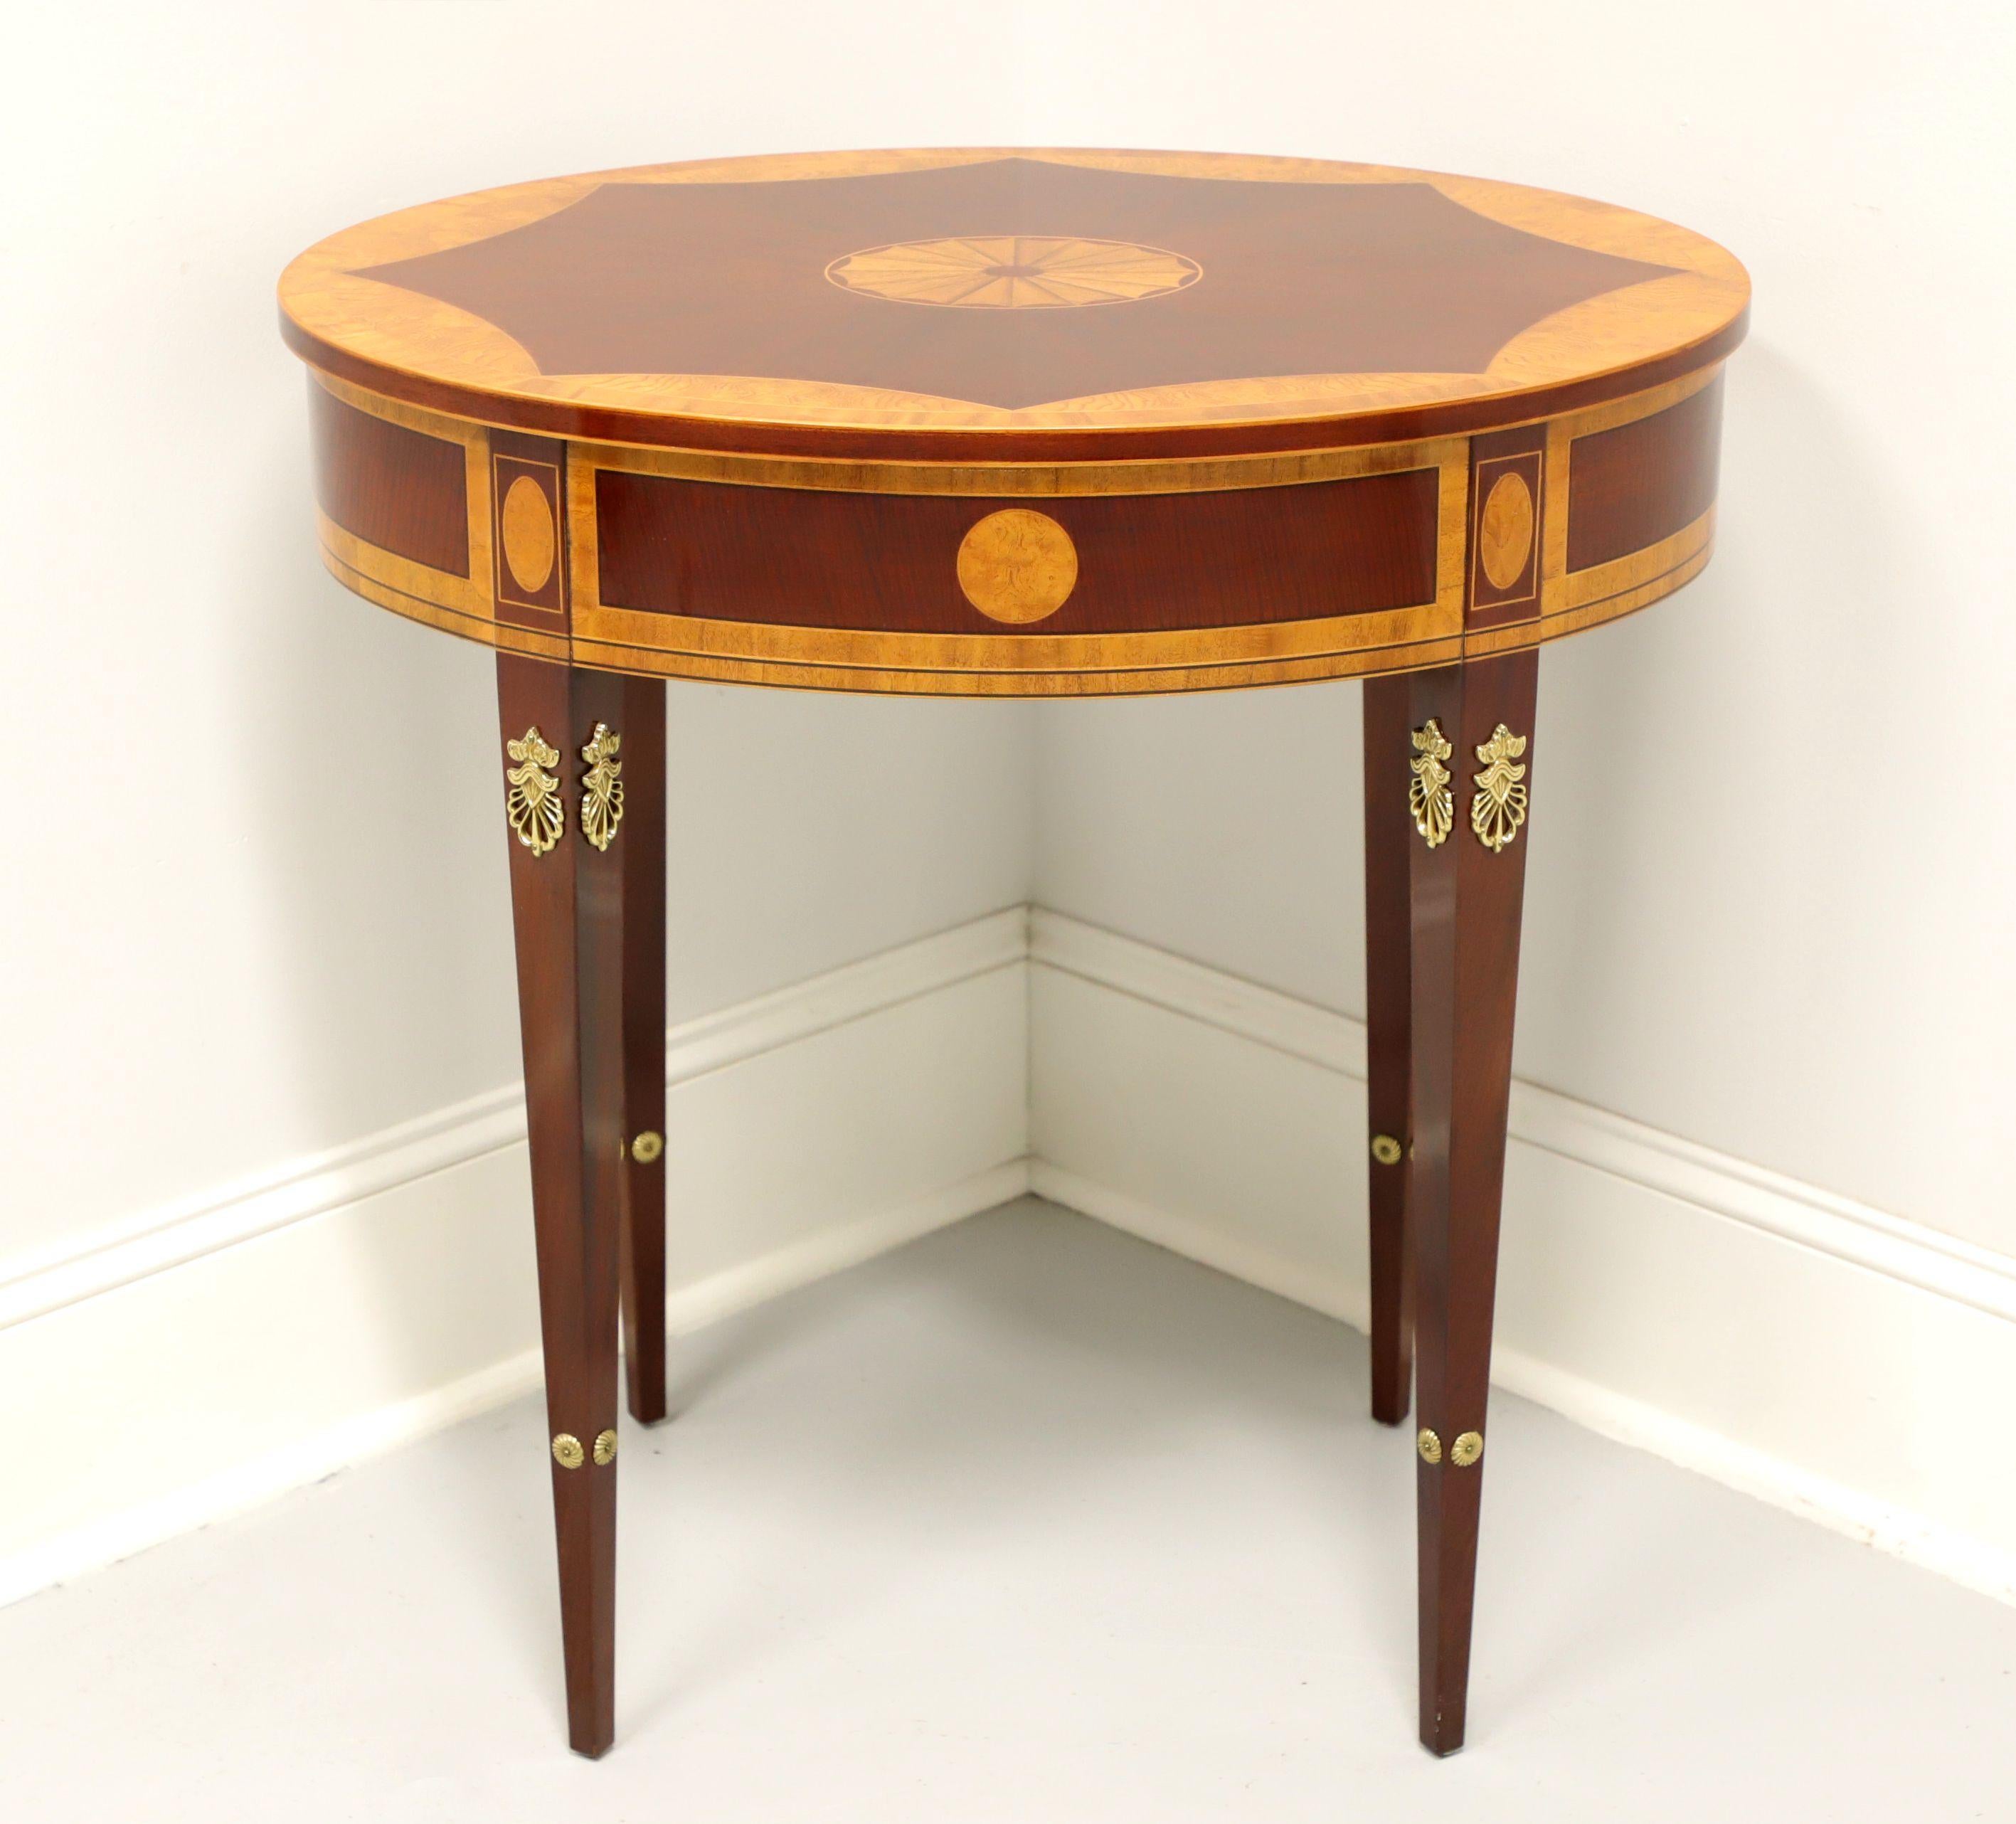 An authorized reproduction of an 18th Century Georgian style oval occasional table by Kindel Furniture, from their Irish Georgian Collection, the original being at Winterthur Museum. Mahogany with inlays of burlwood & satinwood, banded & inlaid top,